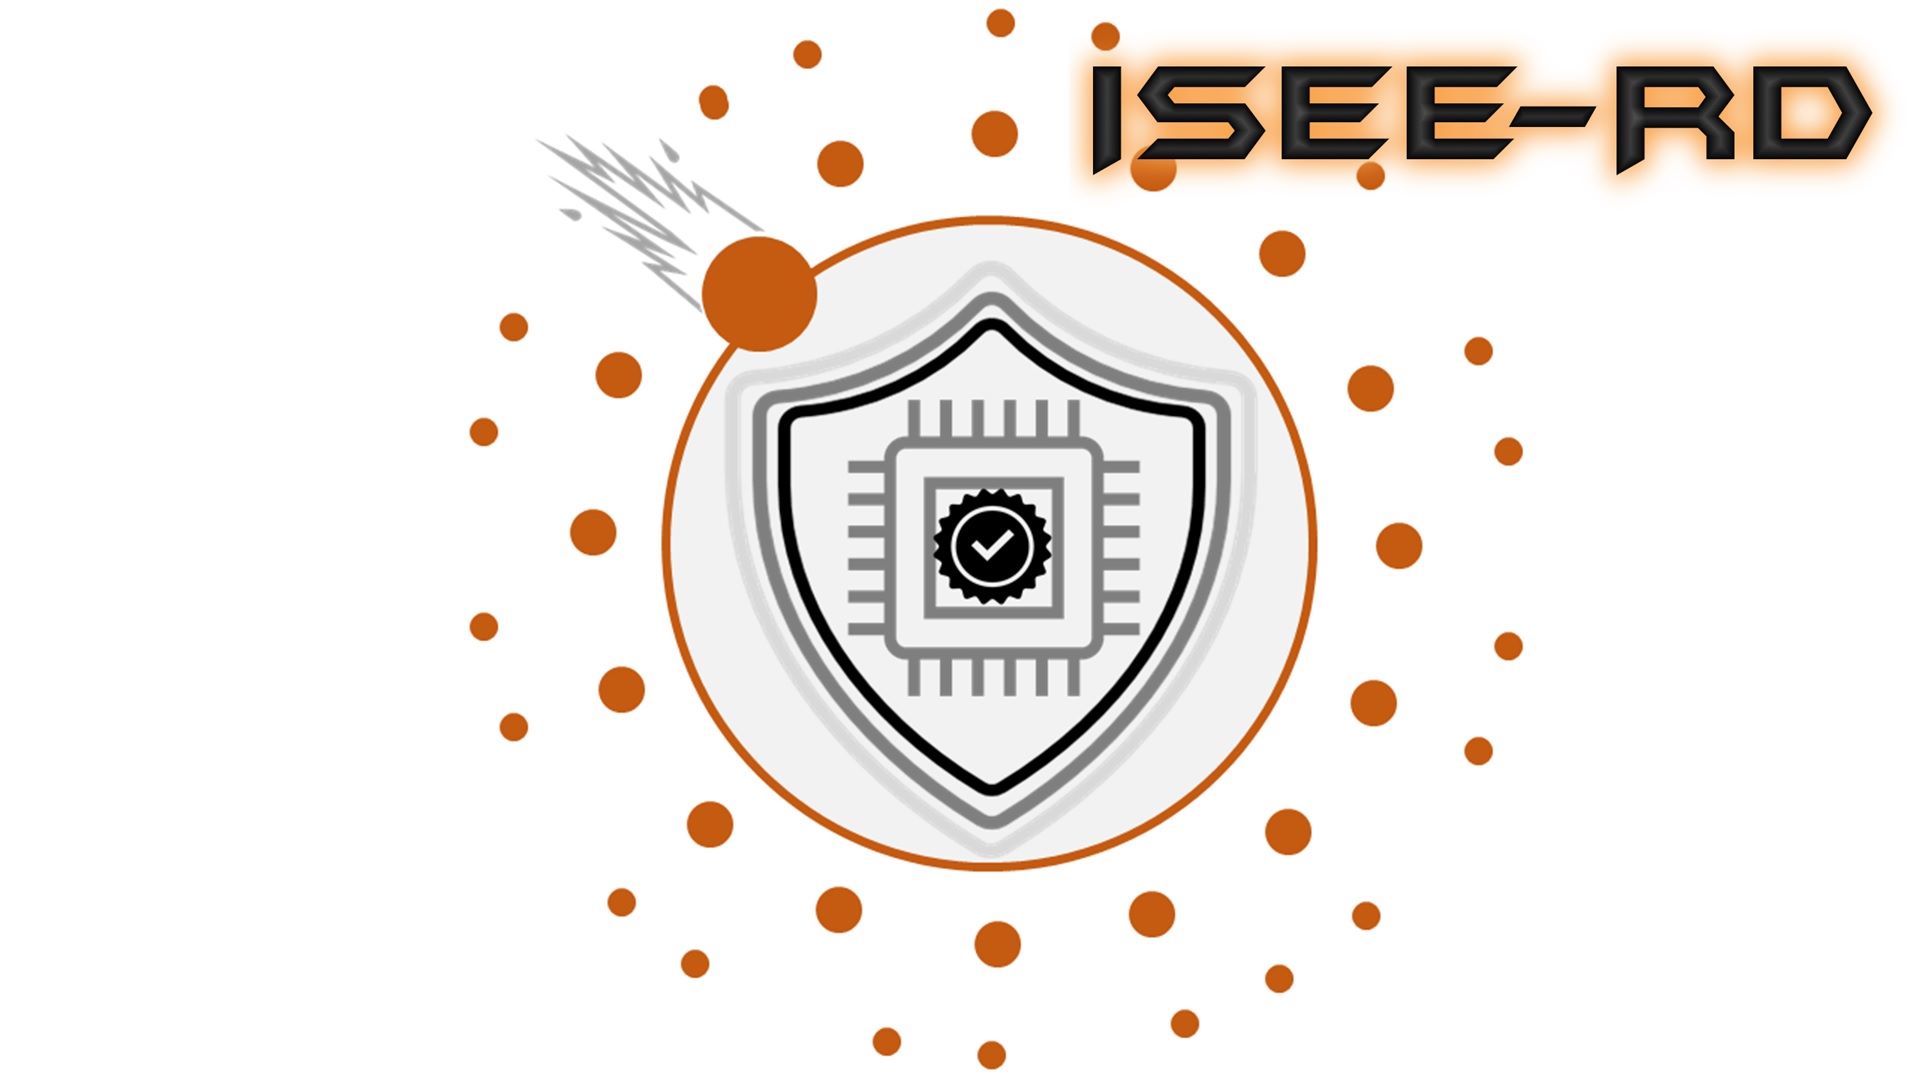 Integrated approach for a SEE robust design (ISEE-RD). - New ideas for the use of Commercial Off The Shelf (COTS) components - ETD